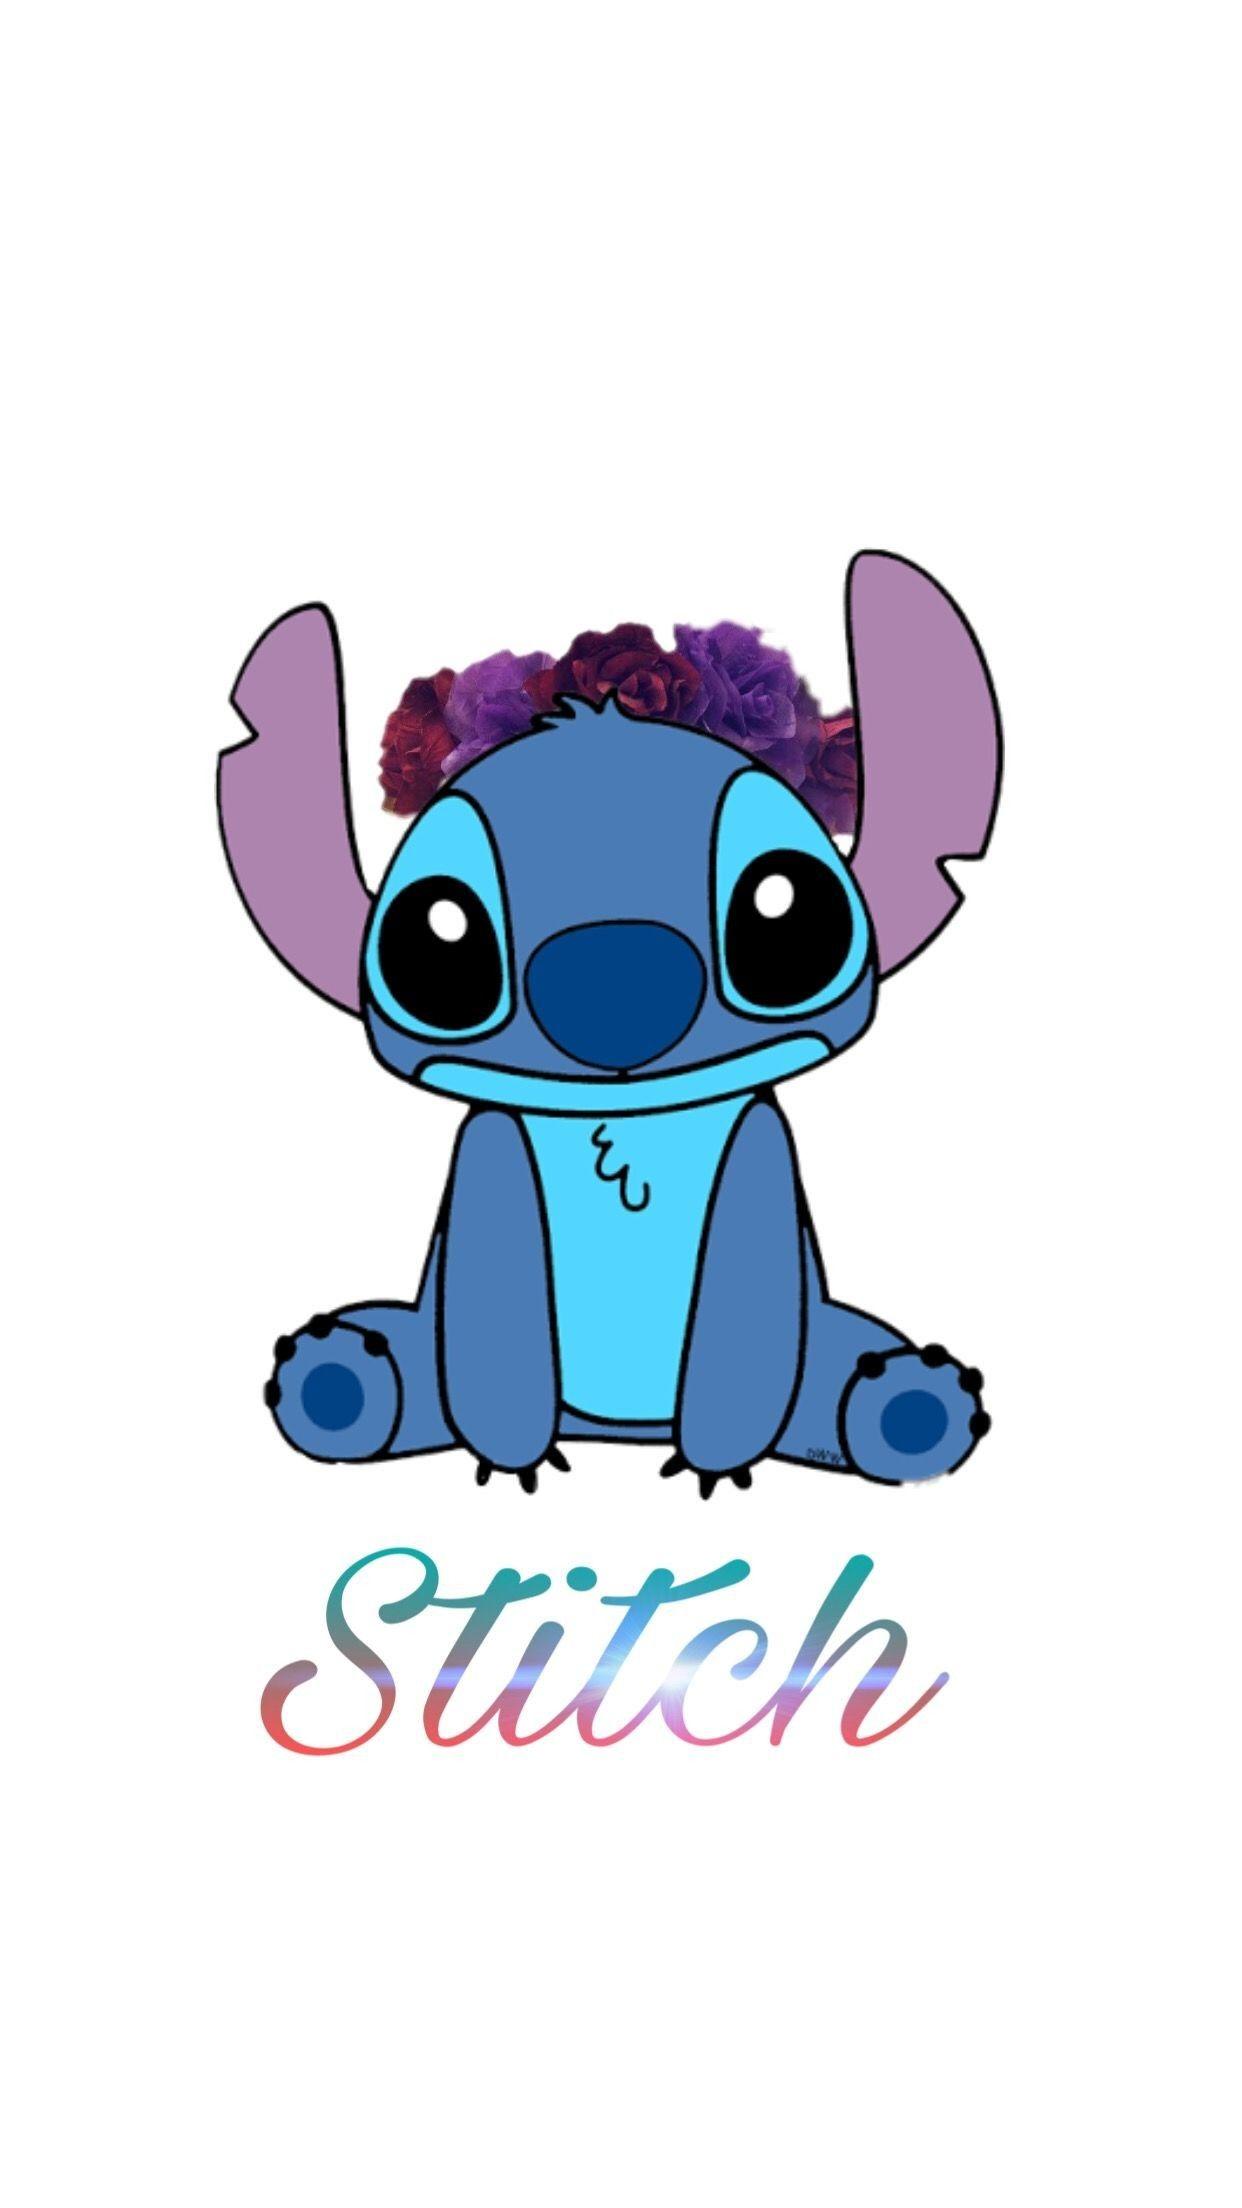 Stitch and angel wallpaper by DisneyClarke  Download on ZEDGE  d6ed